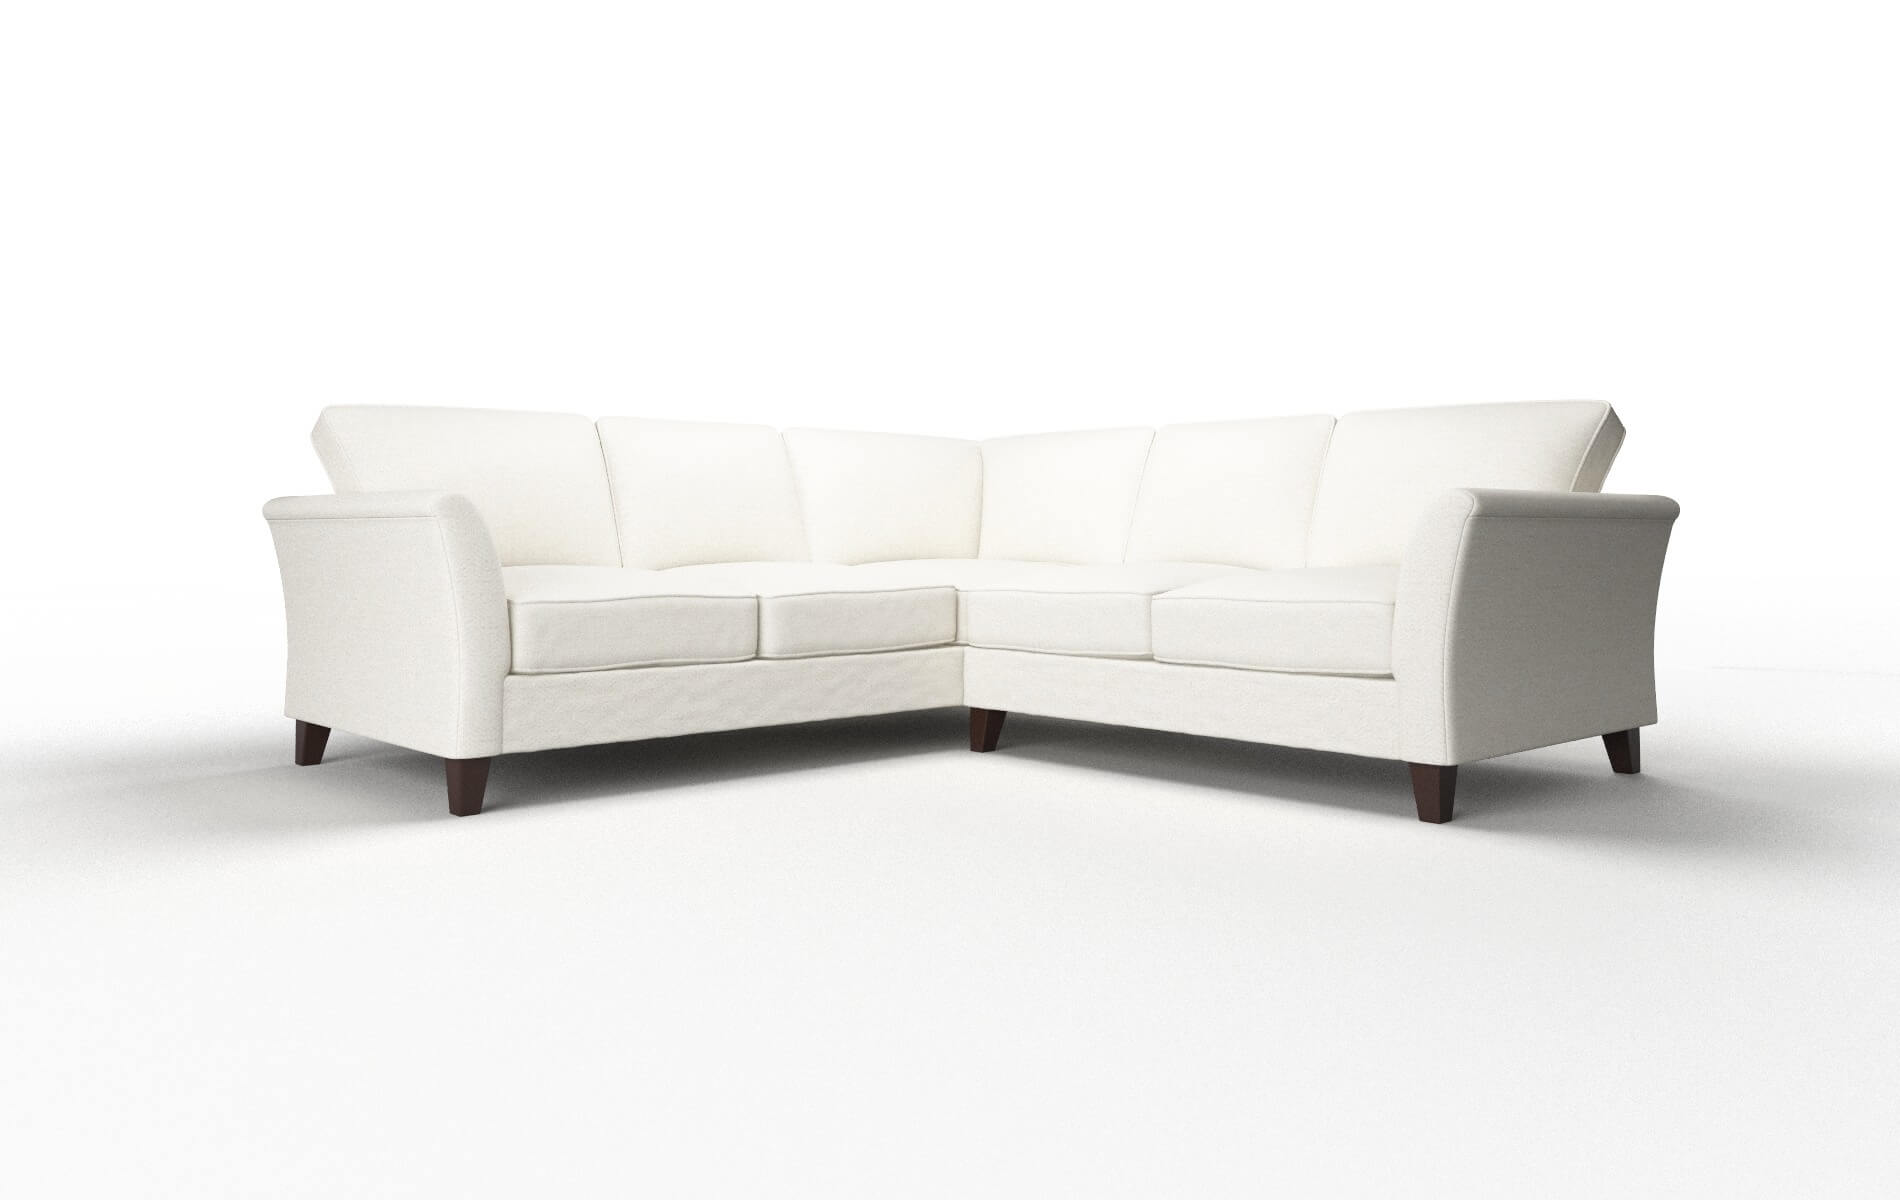 Cologne Catalina Ivory Sectional espresso legs 1